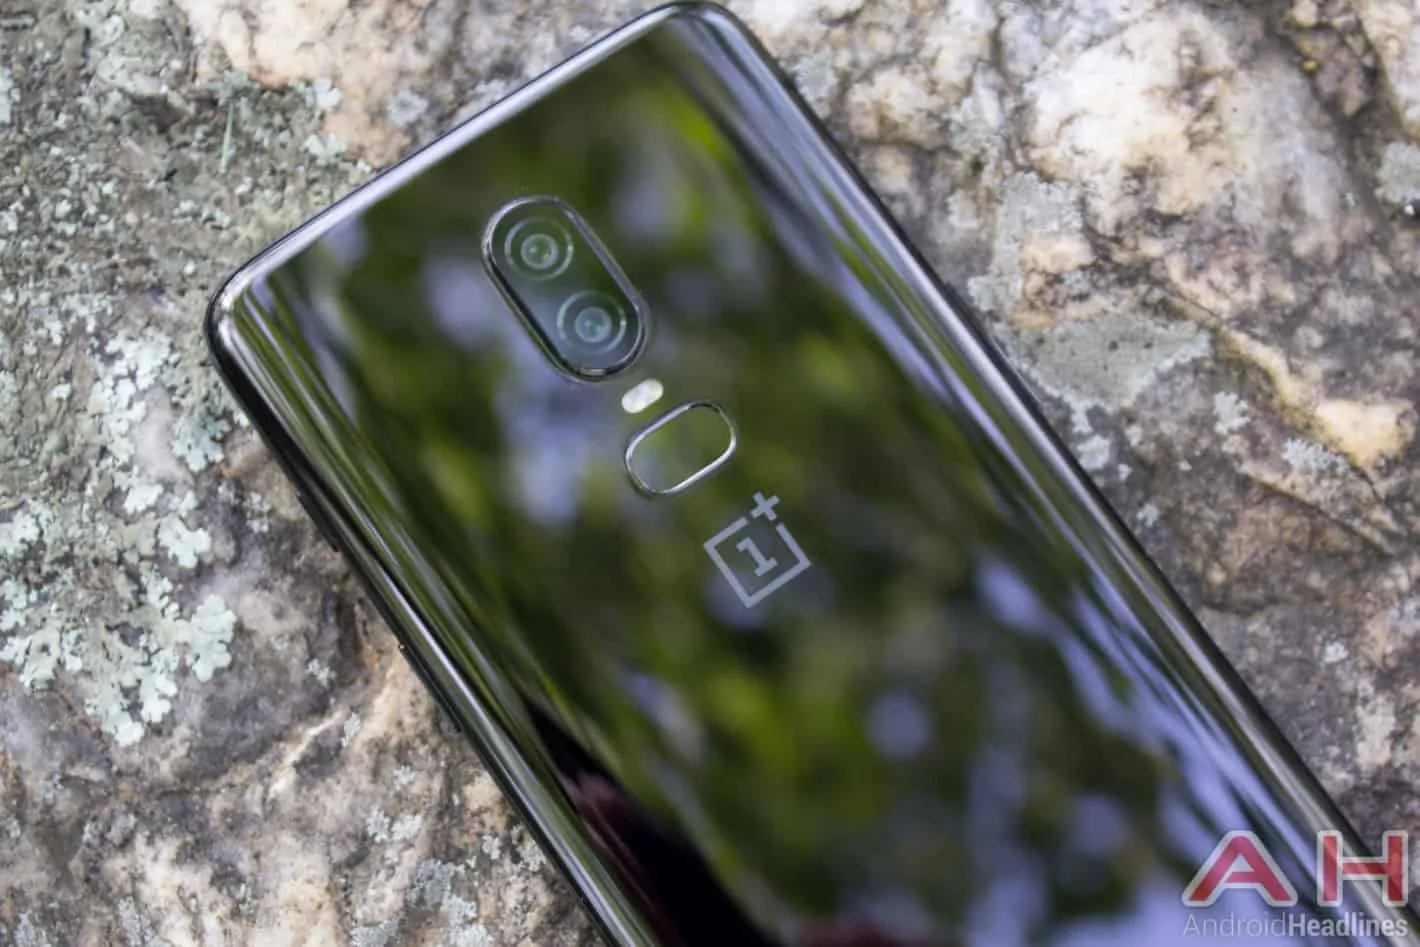 Featured image for OnePlus 6 Camera Outperforms Galaxy Note 8: DxOMark